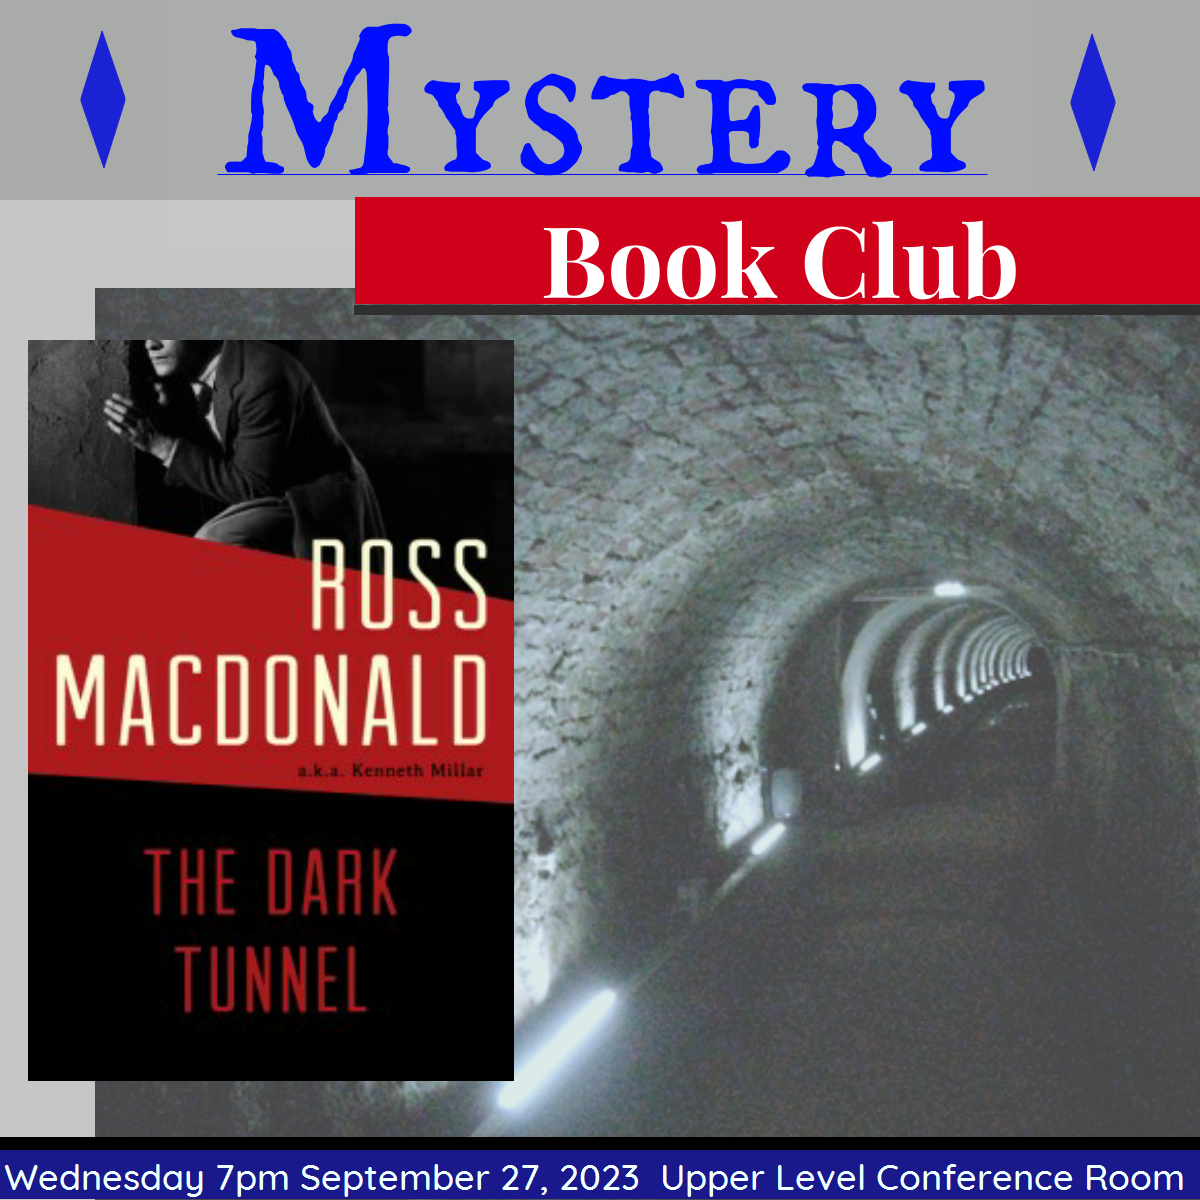 The Dark Tunnel by Ross McDonald